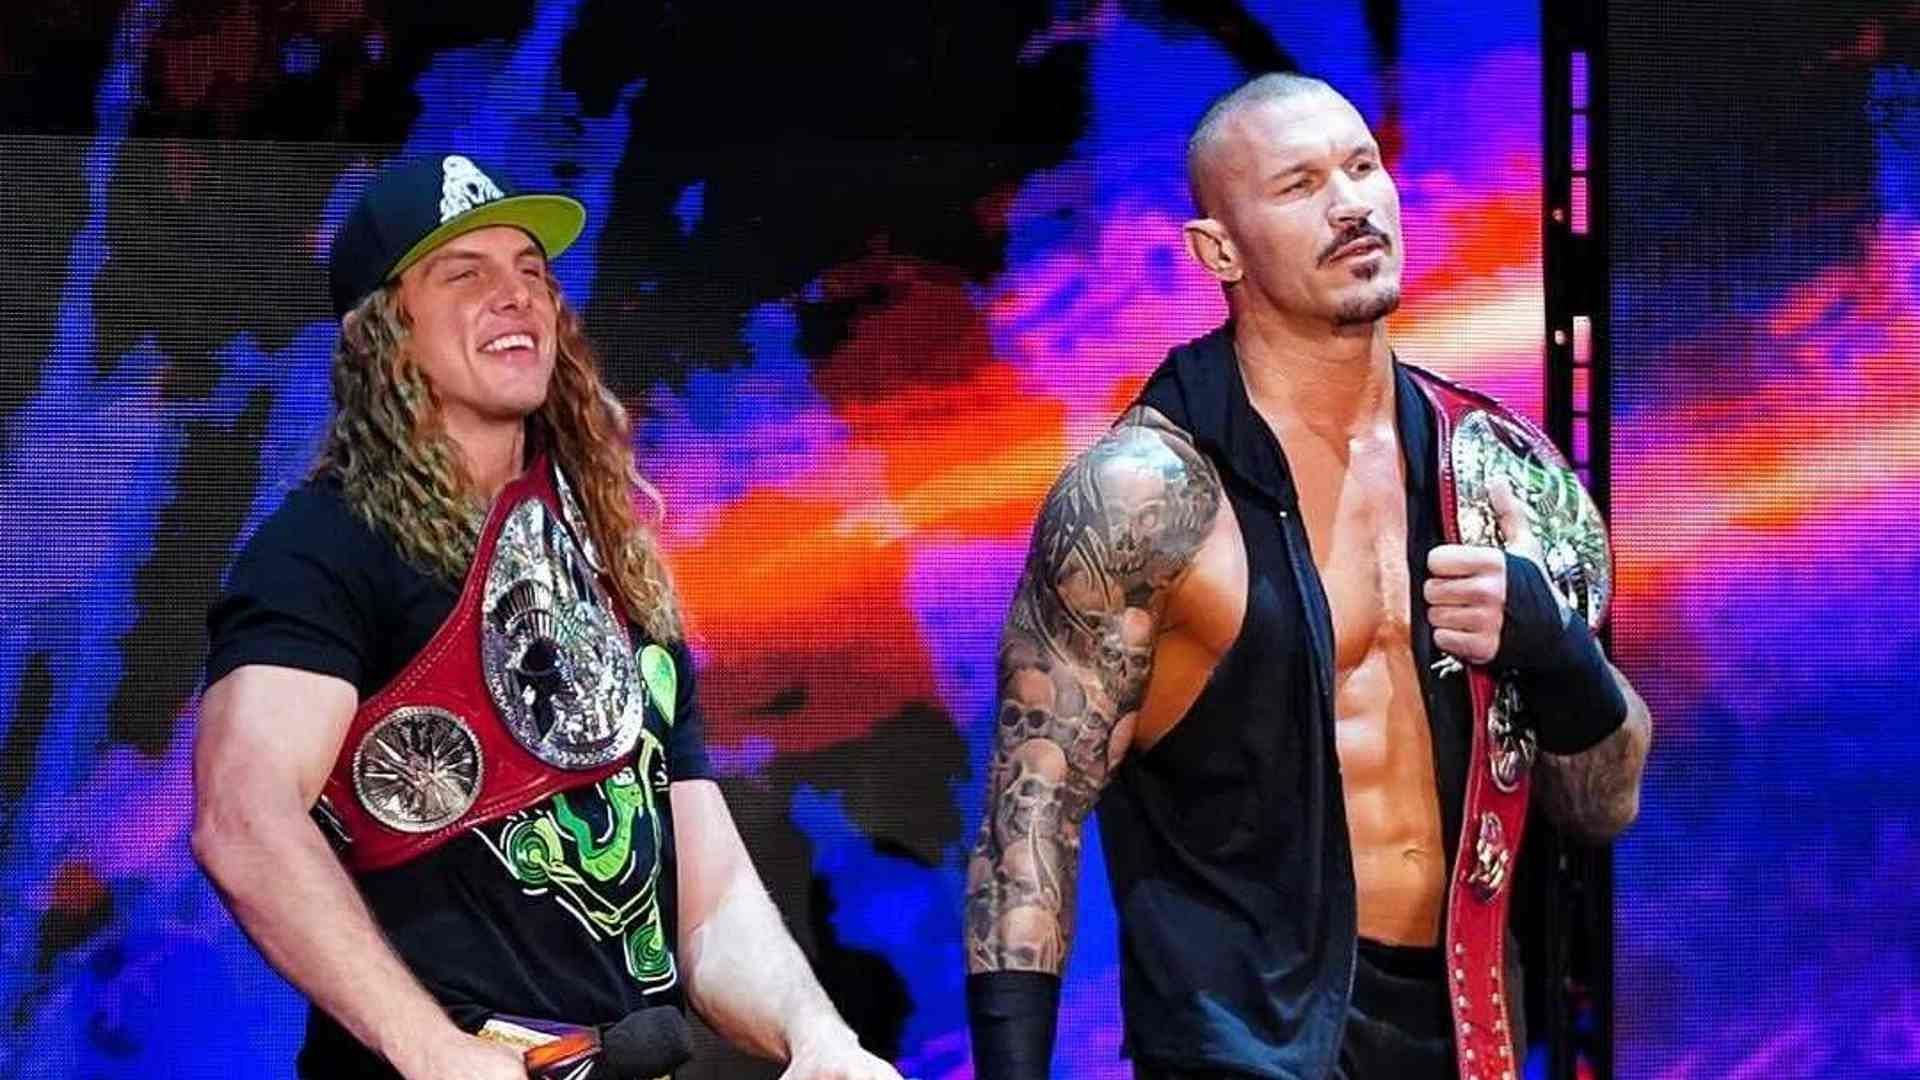 Riddle and Randy Orton have fantastic chemistry together.